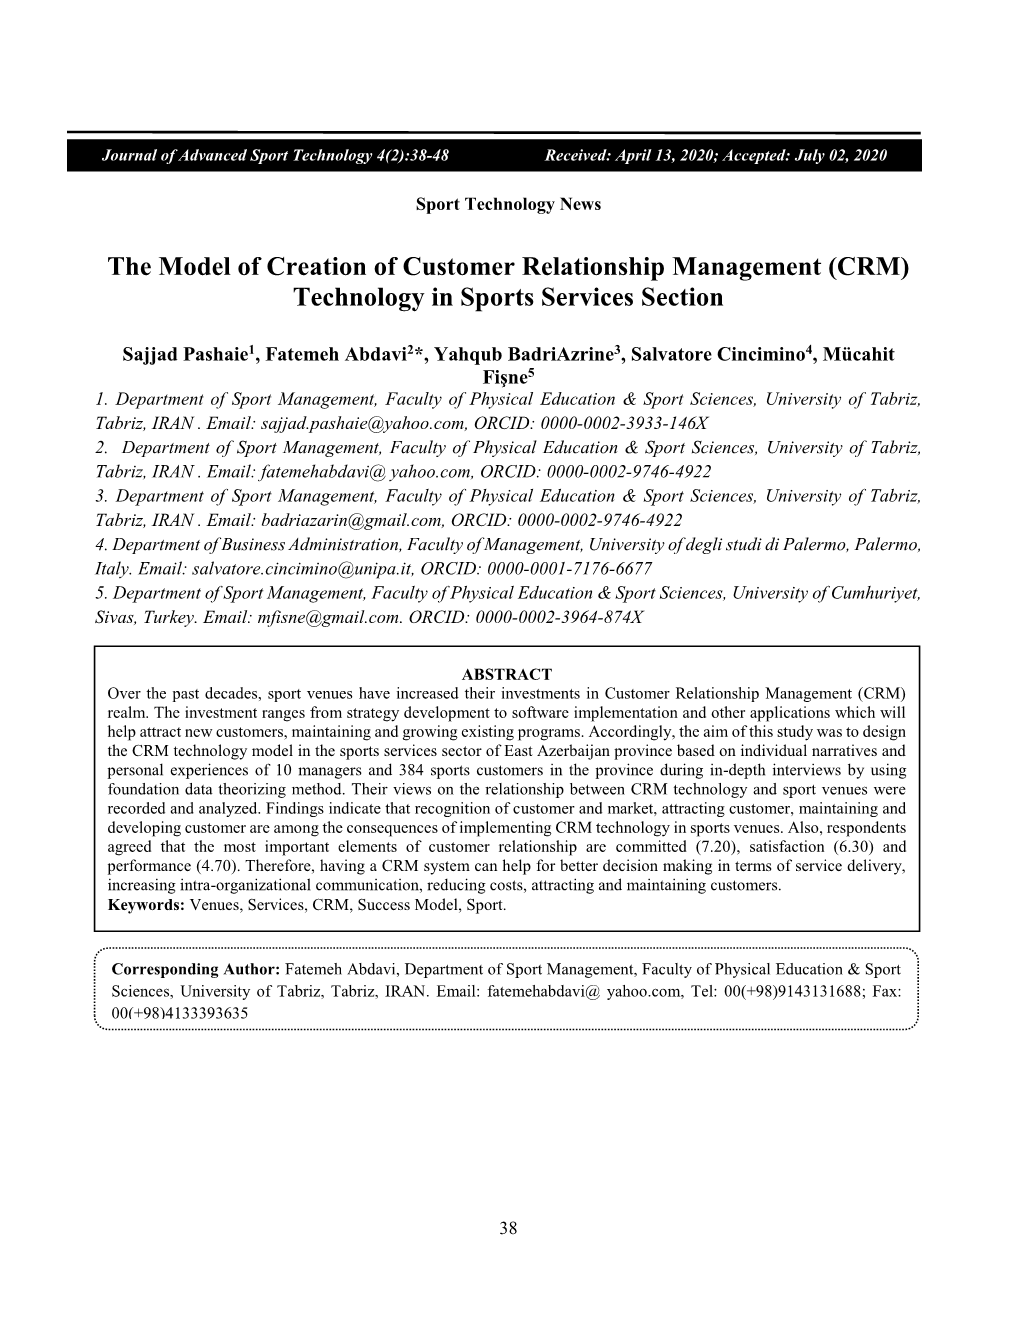 The Model of Creation of Customer Relationship Management (CRM) Technology in Sports Services Section